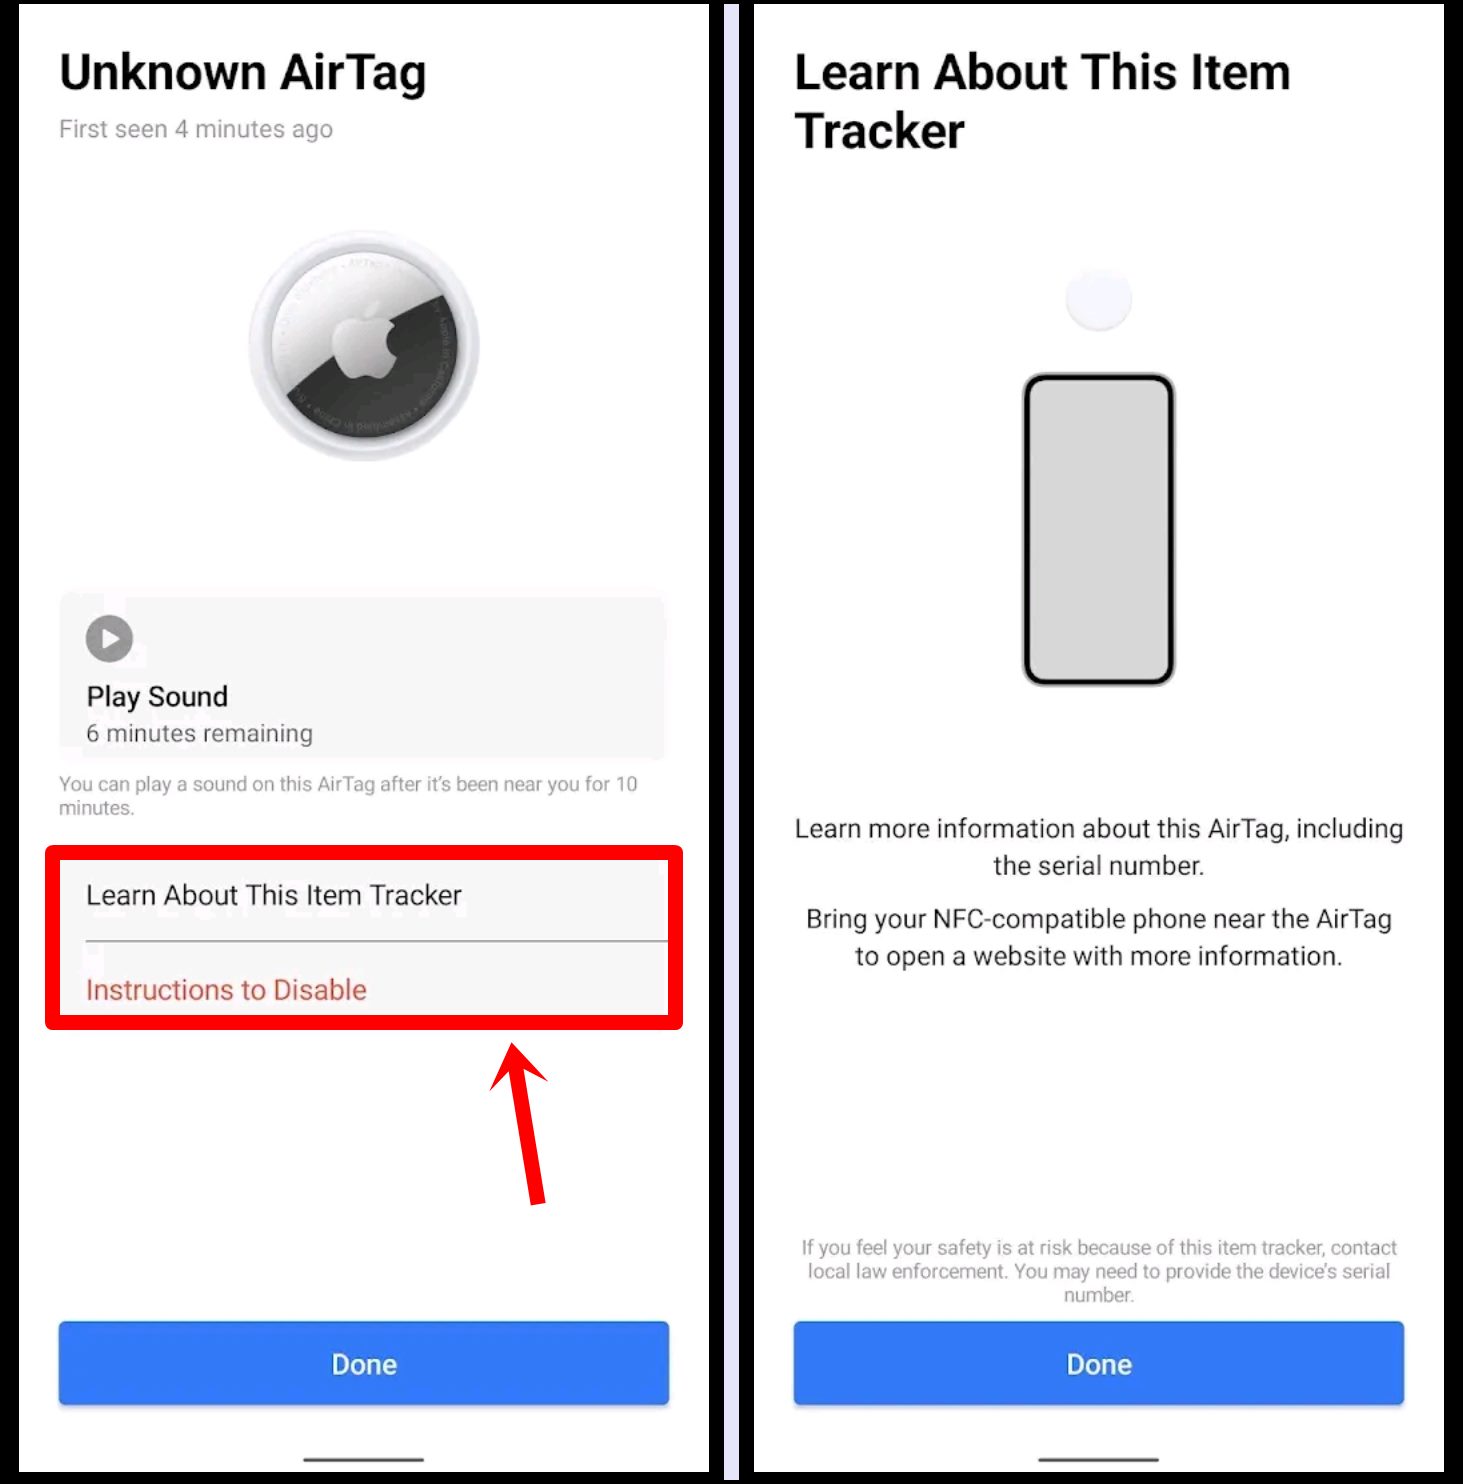 Track AirTags with Android: This image shows 2 screenshots of the Tracker Detect app - One displaying the Unknown AirTag screen with the "Learn About This Item Tracker" option highlighted, another displaying the Learn About This Item Tracker screen.